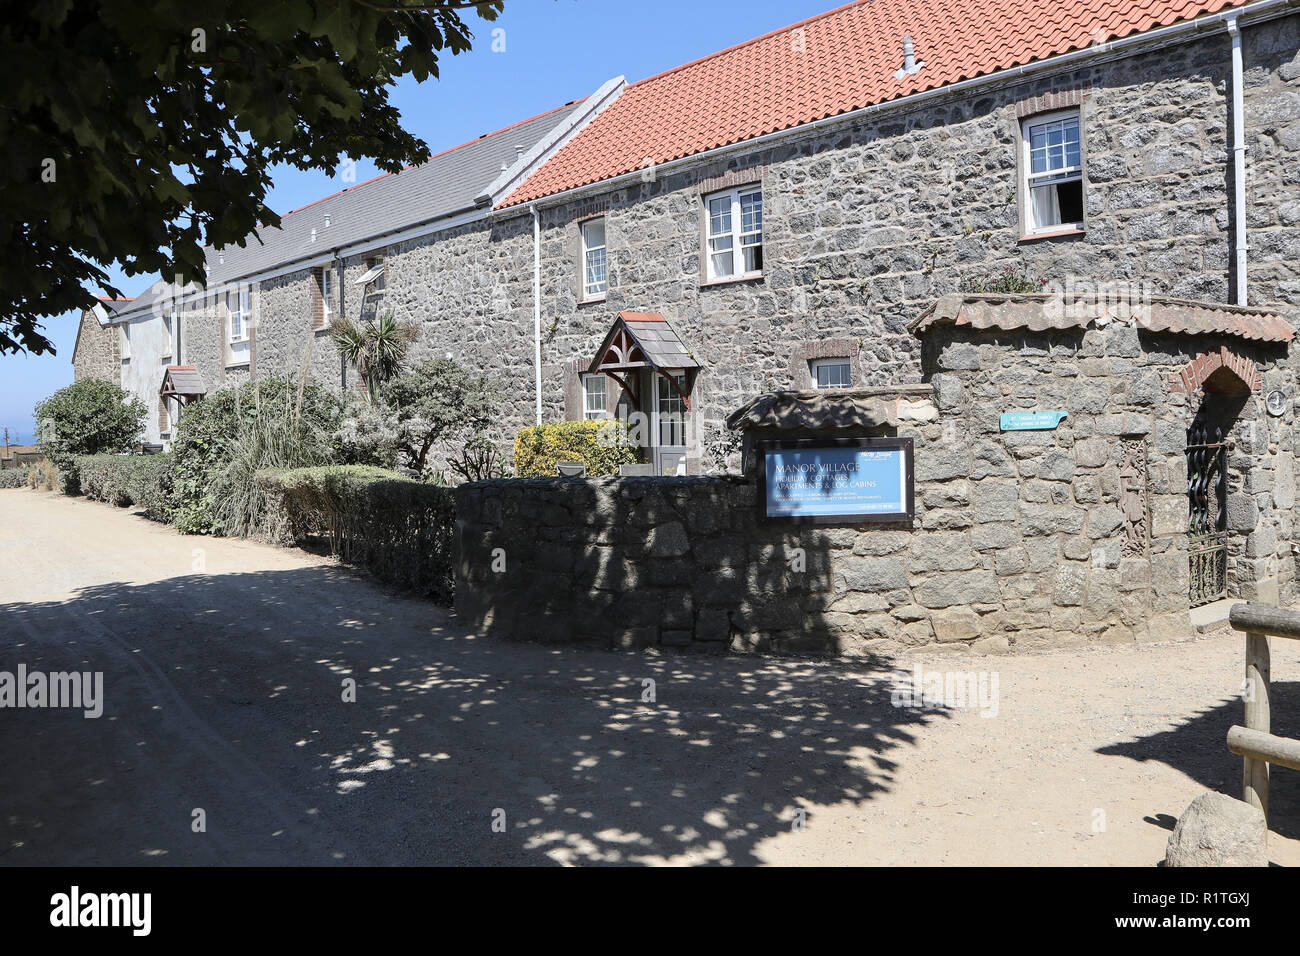 Manor Village Holiday Cottages On Herm Island Channel Islands Uk